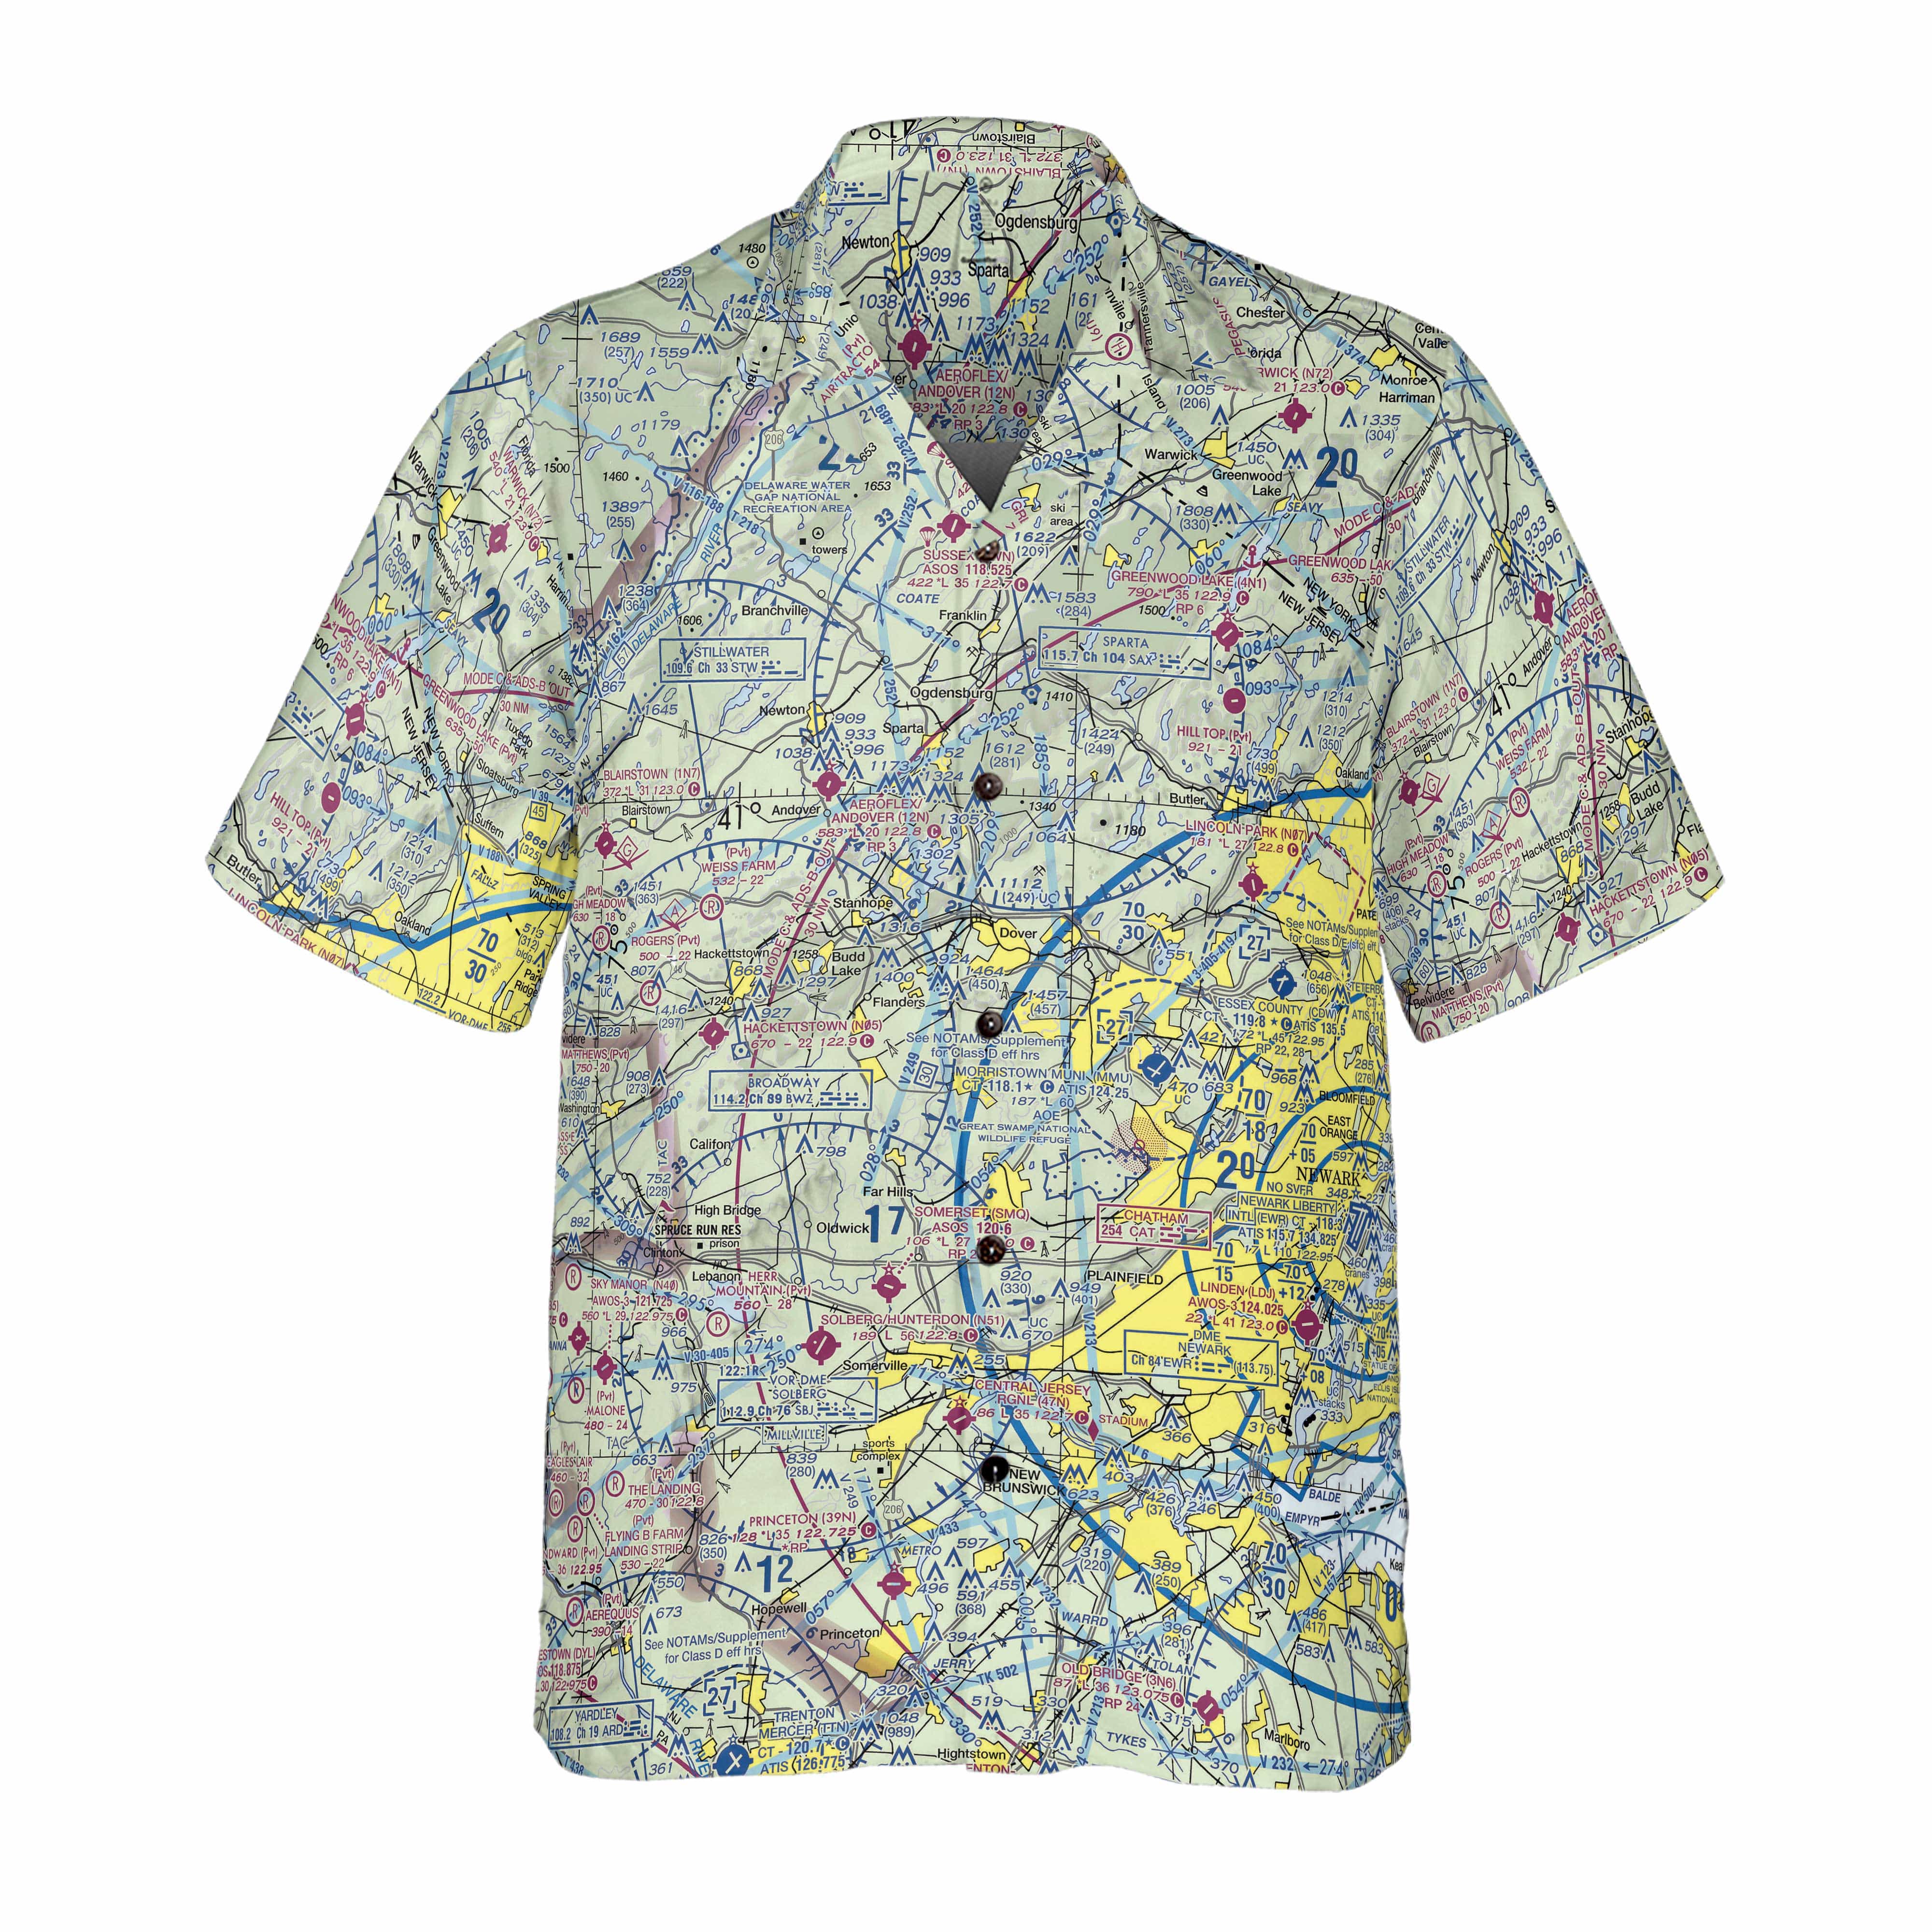 AOP Coconut Button Shirt The Greenwood Lake to Aeroflex-Andover Flight Above Coconut Button Camp Shirt